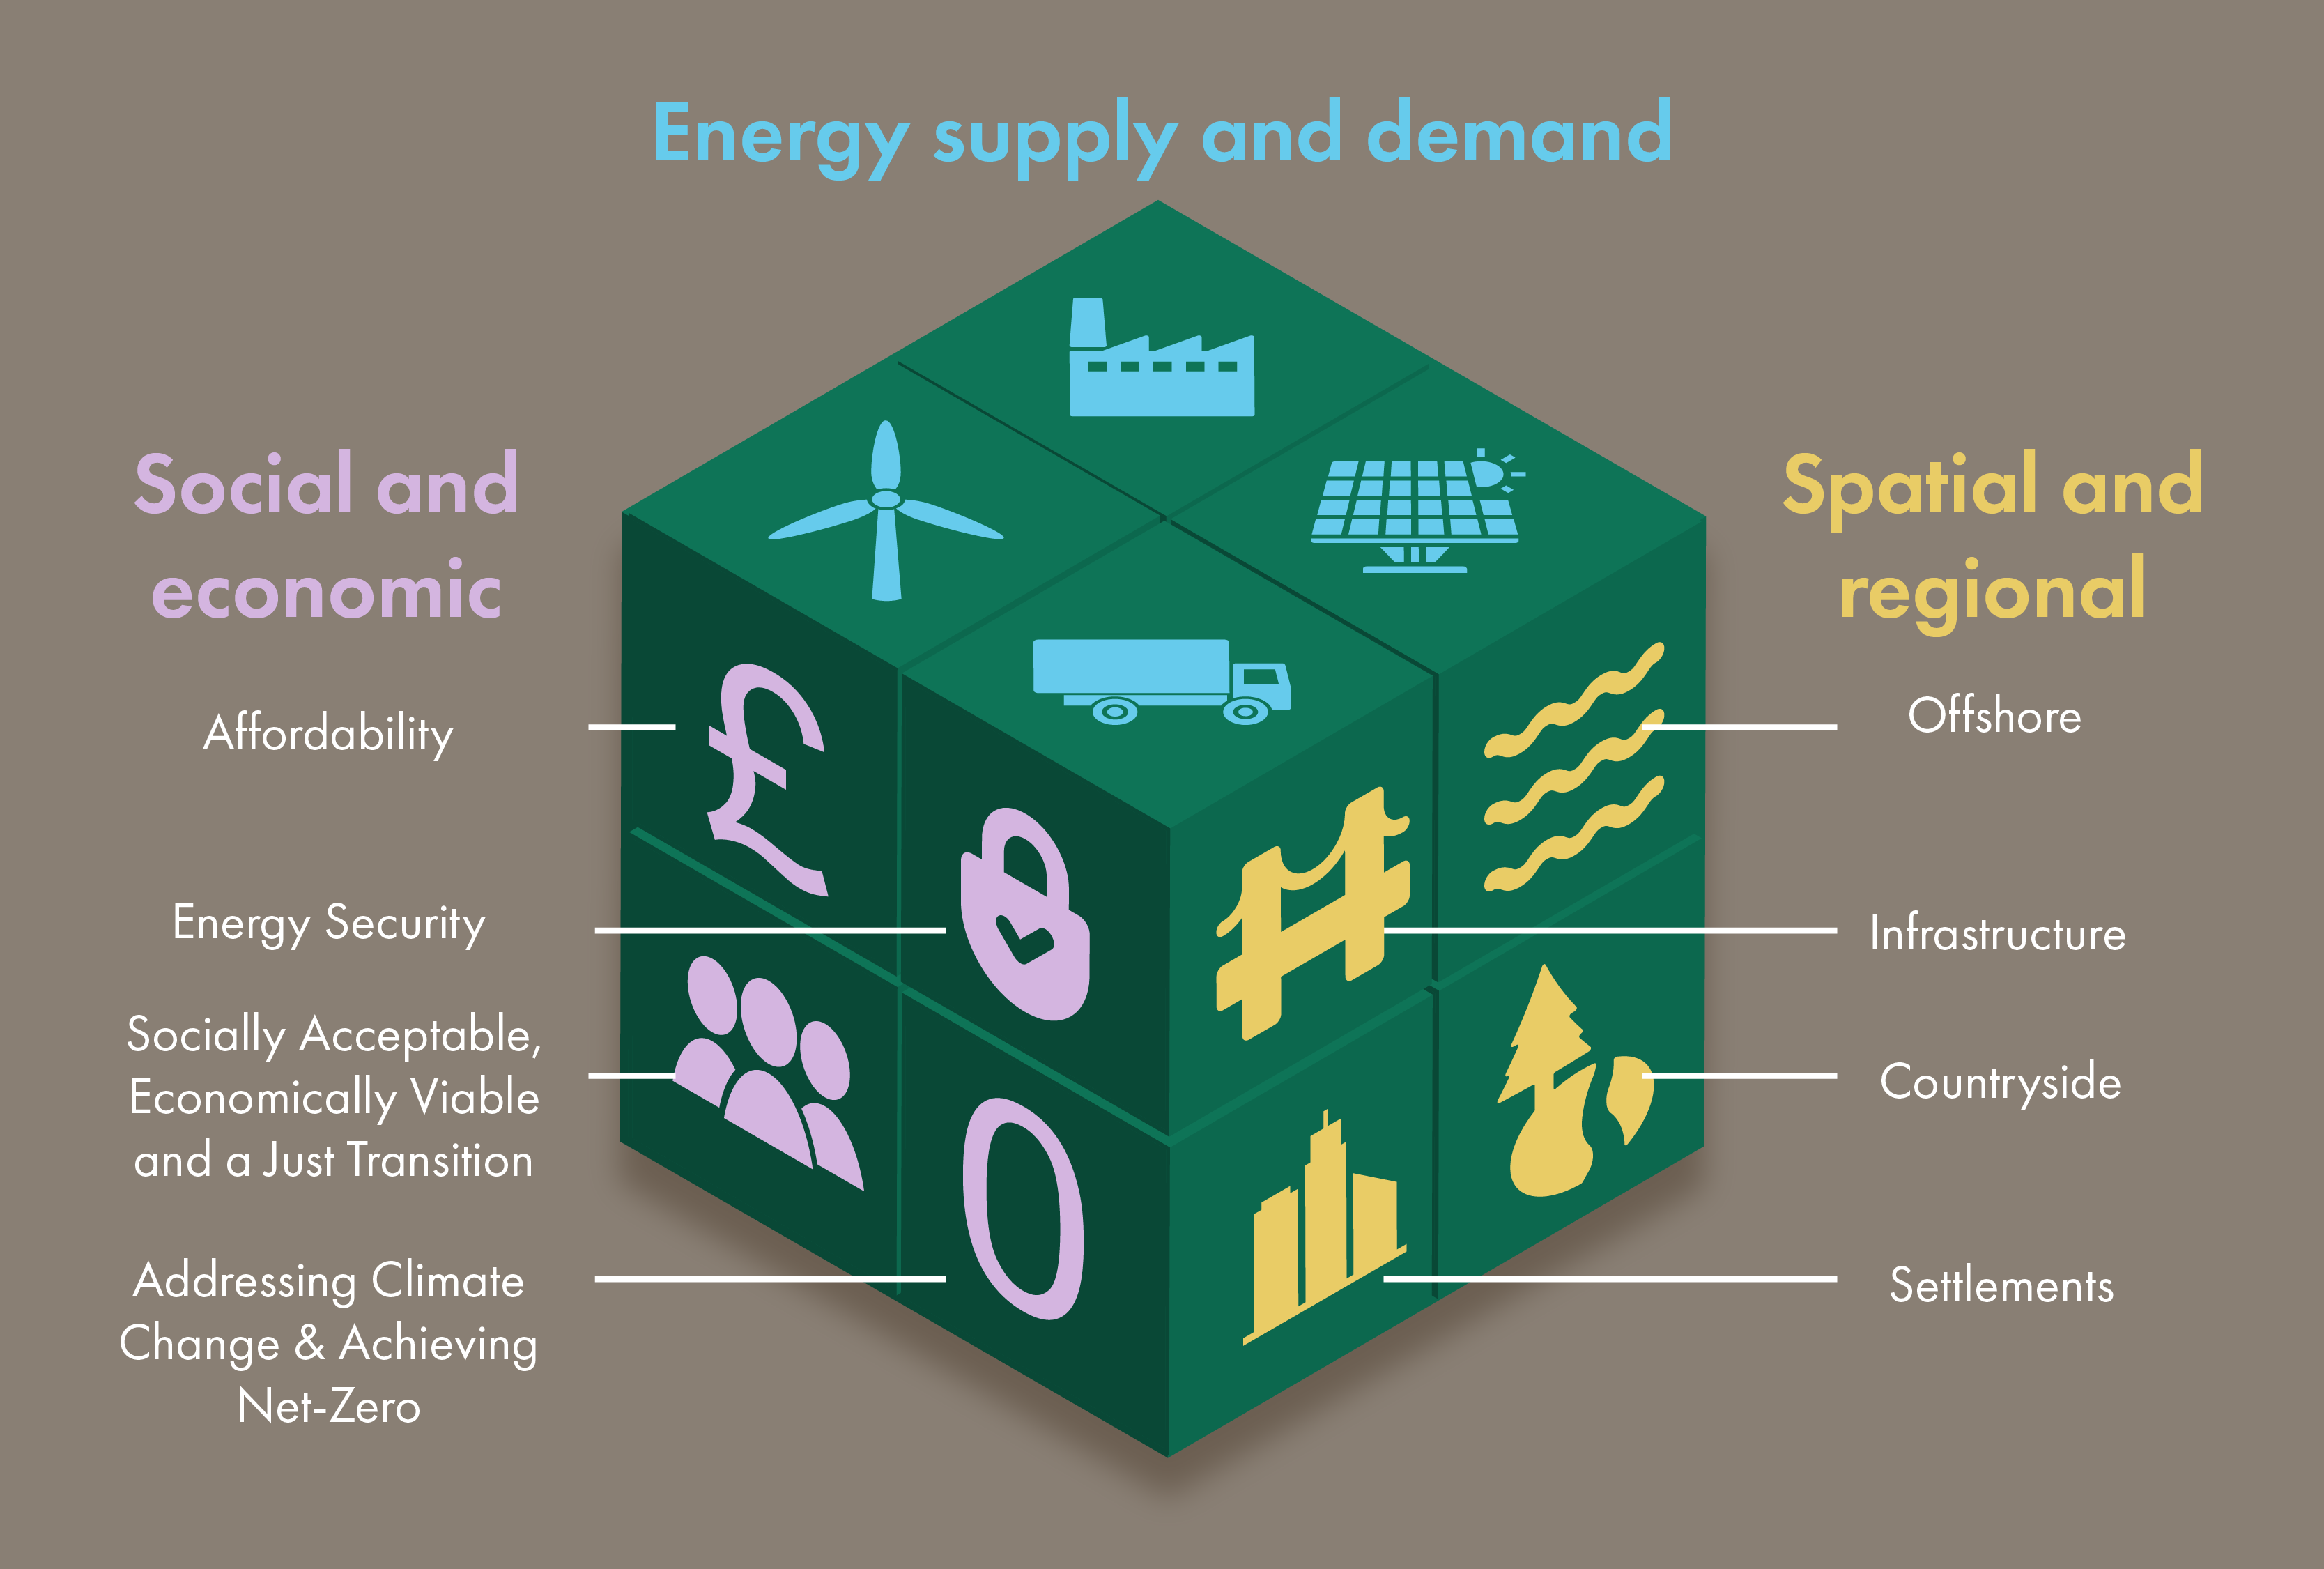 Energy policy has to try to solve numerous paradoxes of supply and demand - like a Rubik's Cube, the challenge is to manage horizontal (energy), vertical (industrial) and spatial (regional) positions, where policies and actions to address a pressing issue on one plane have potentially detrimental impacts on another.